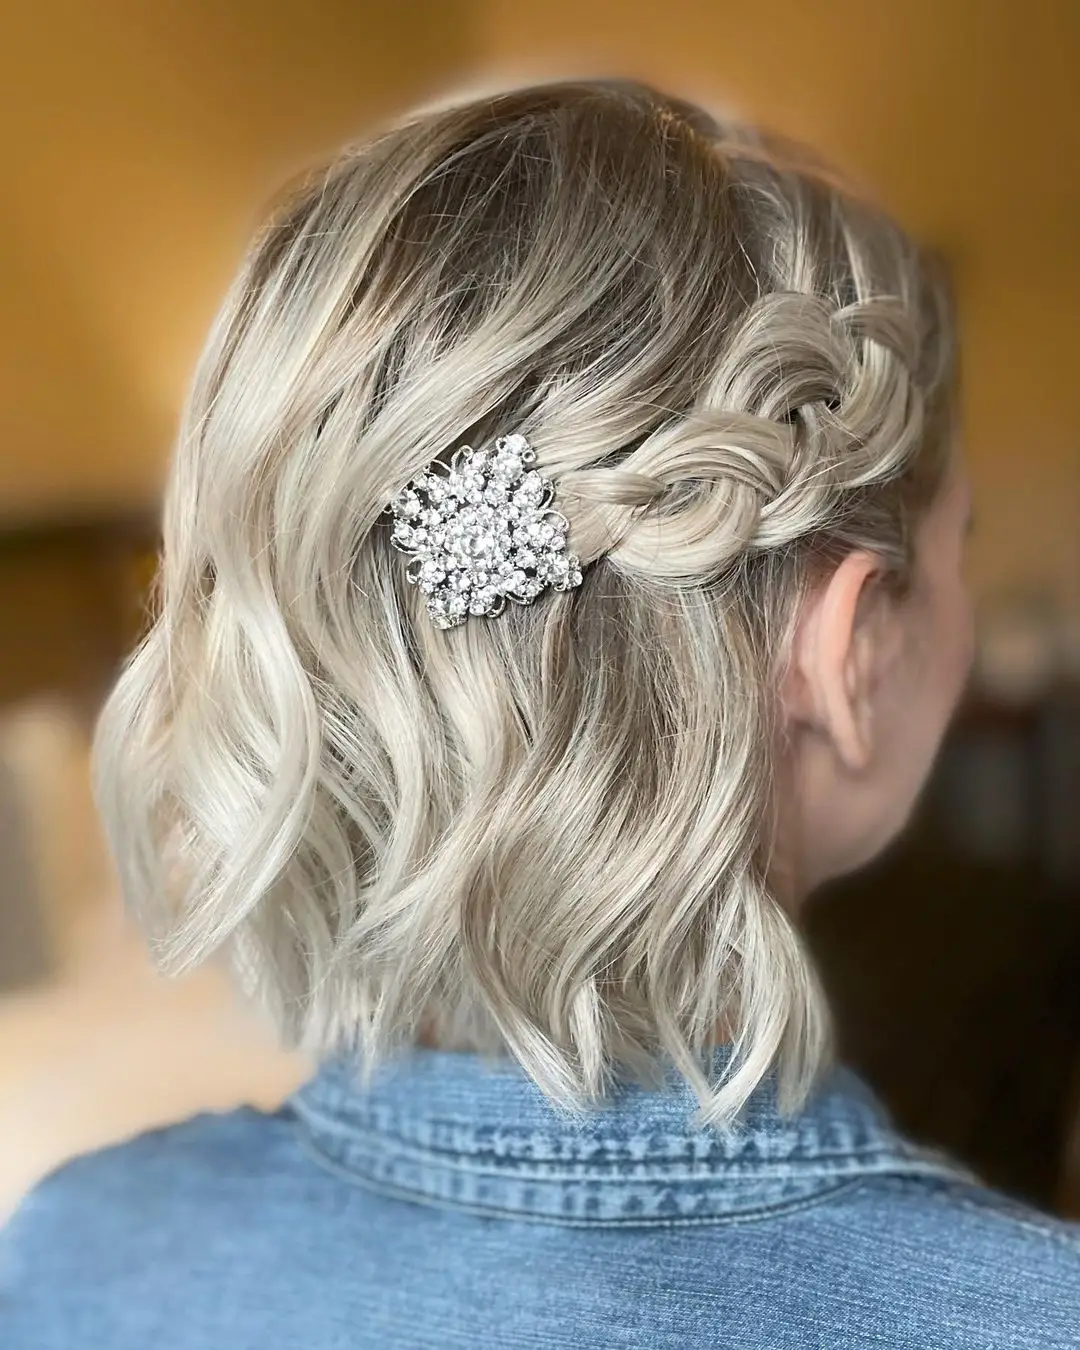 51-homecoming-prom-hairstyles-for-girls-with-short-hair Loose Wave and Single Pinned Braid